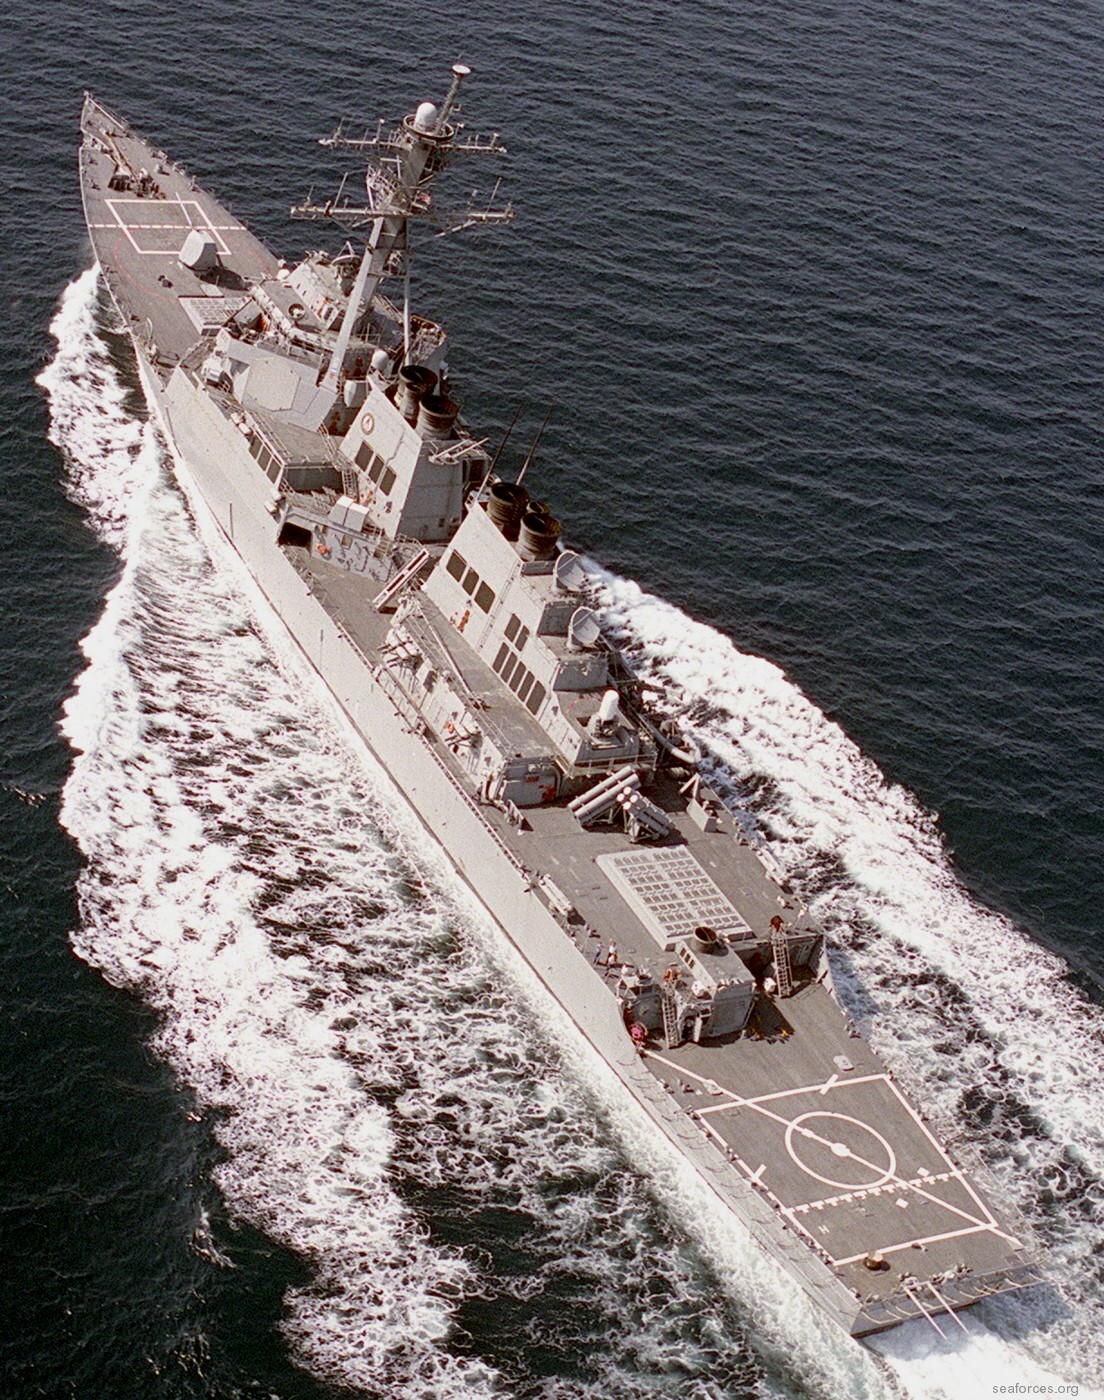 ddg-52 uss barry guided missile destroyer us navy 94 aegis combat system